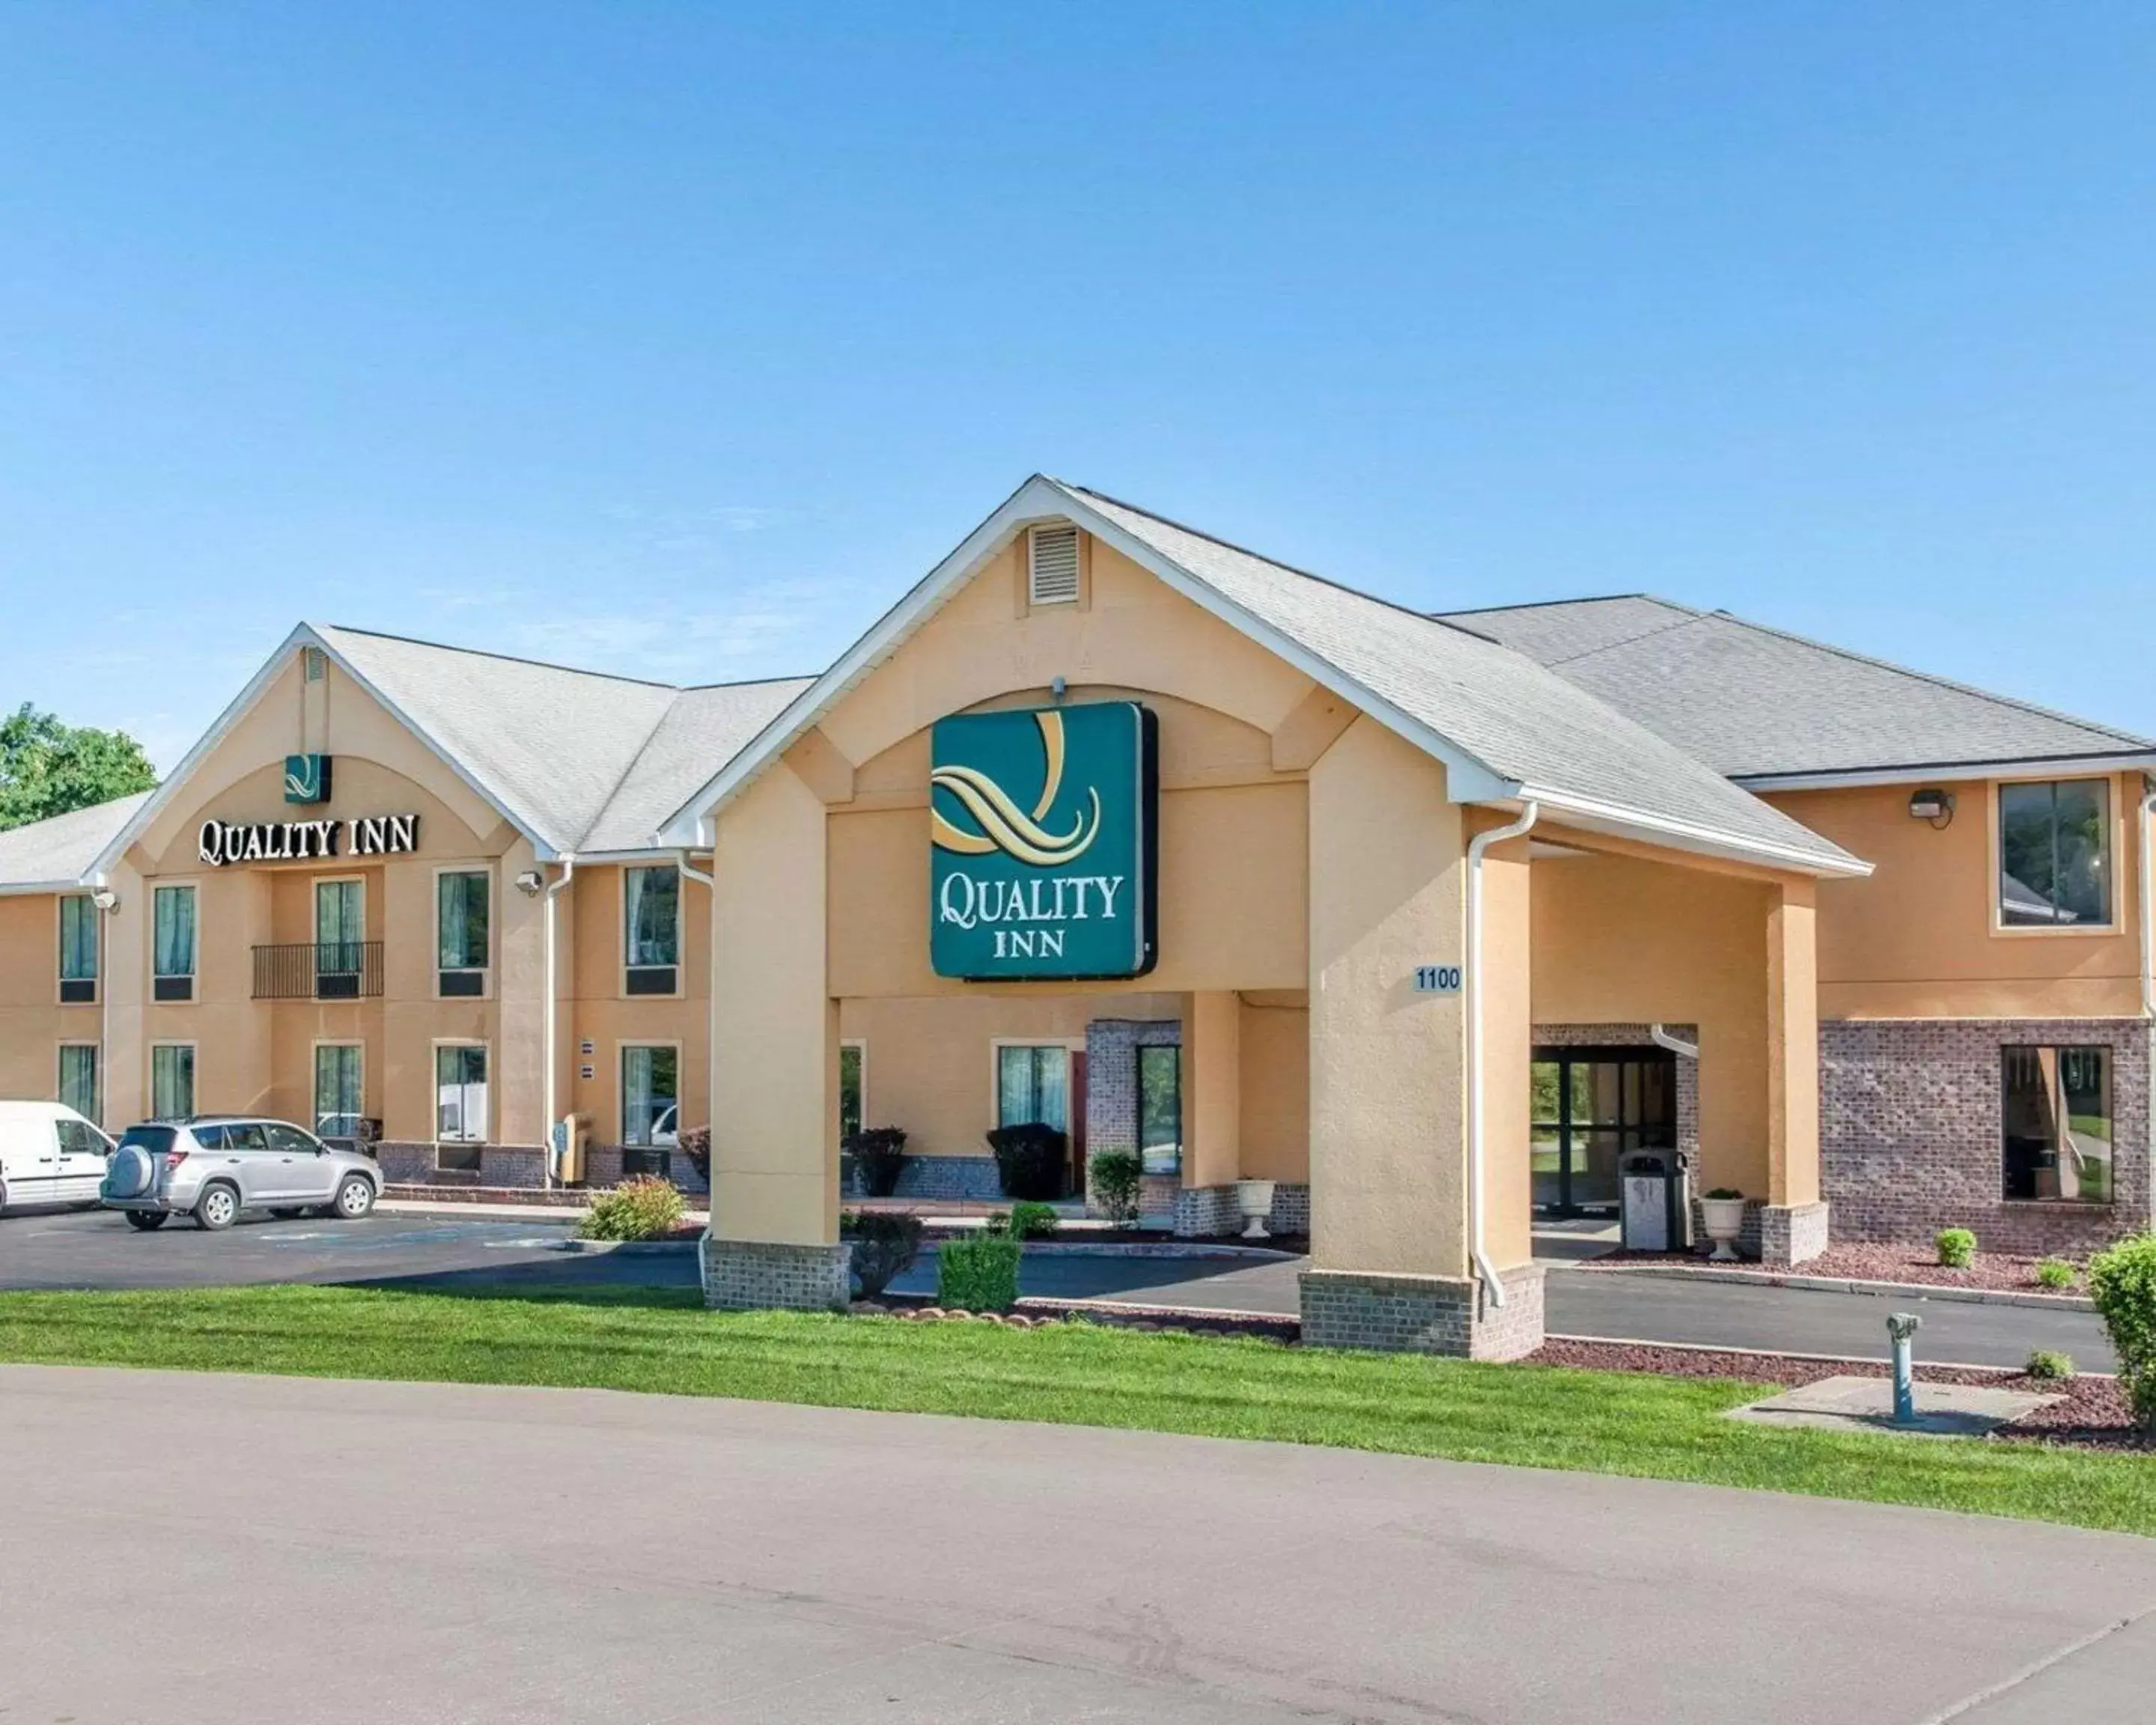 Property building in Quality Inn Bloomington